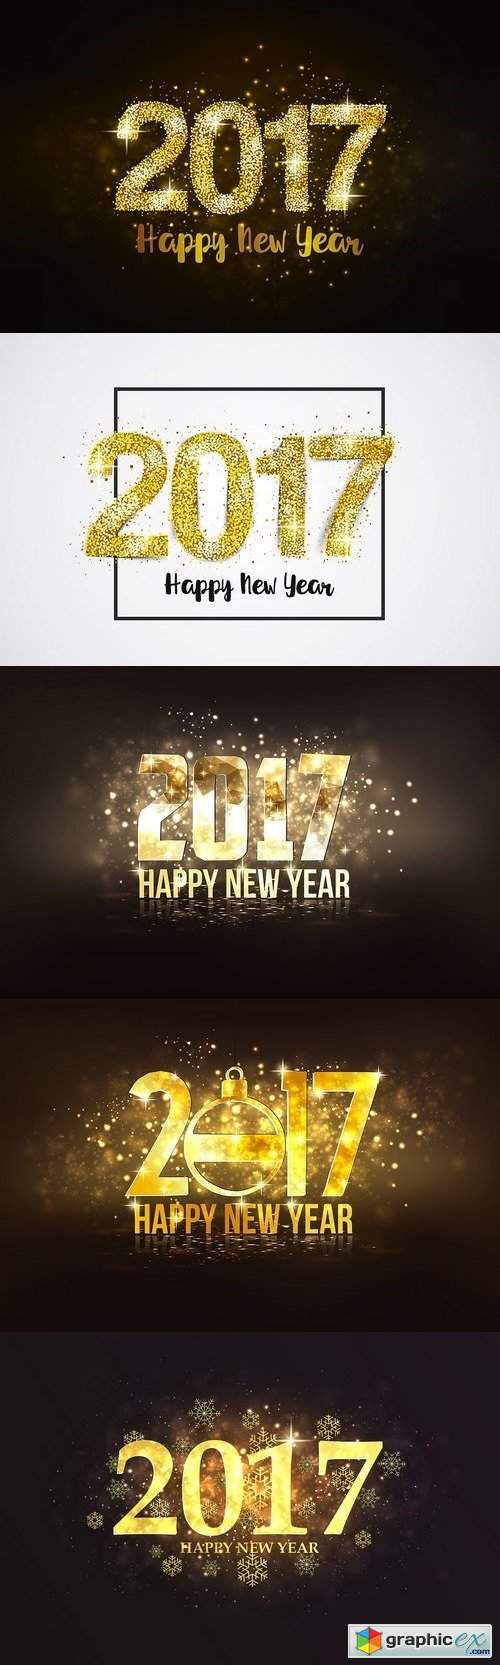 Set of Happy New Year backgrounds